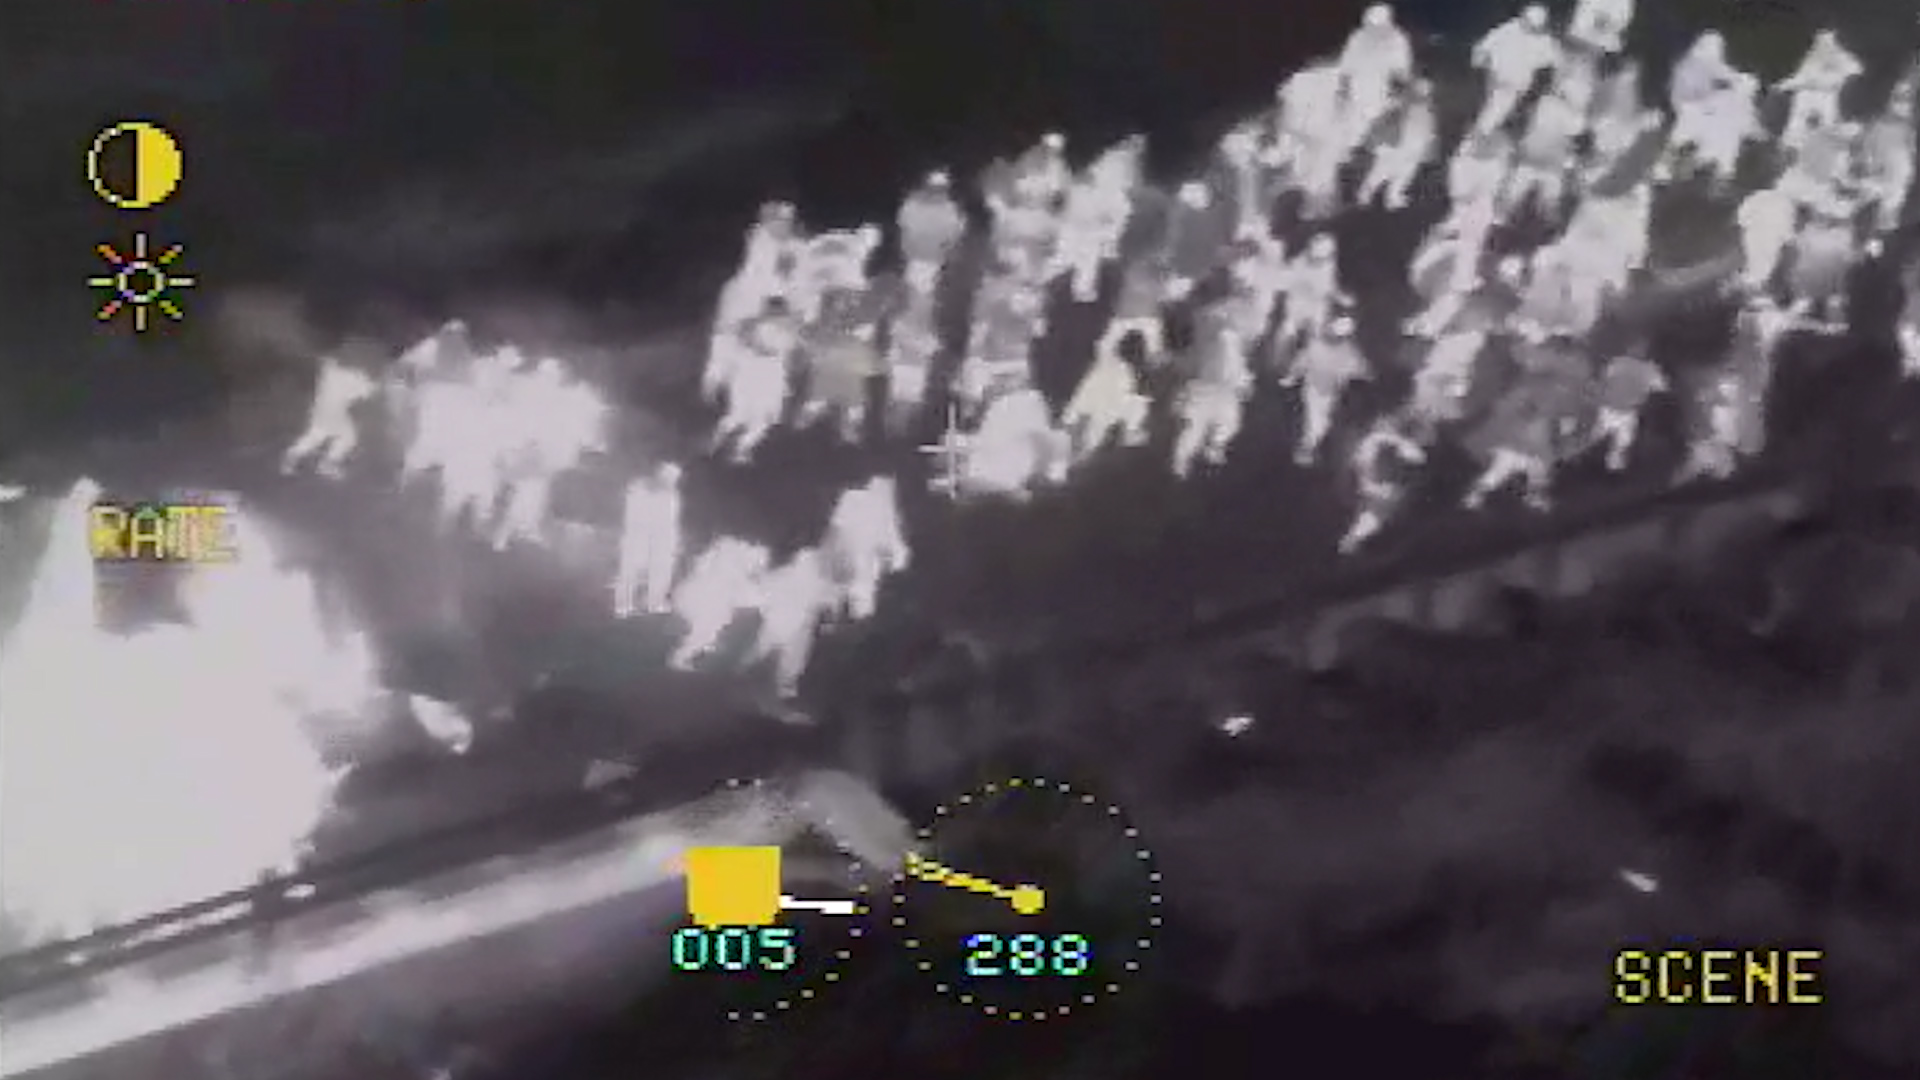 Infrared Aerial Surveillance Used at Standing Rock to Monitor and Track Protesters